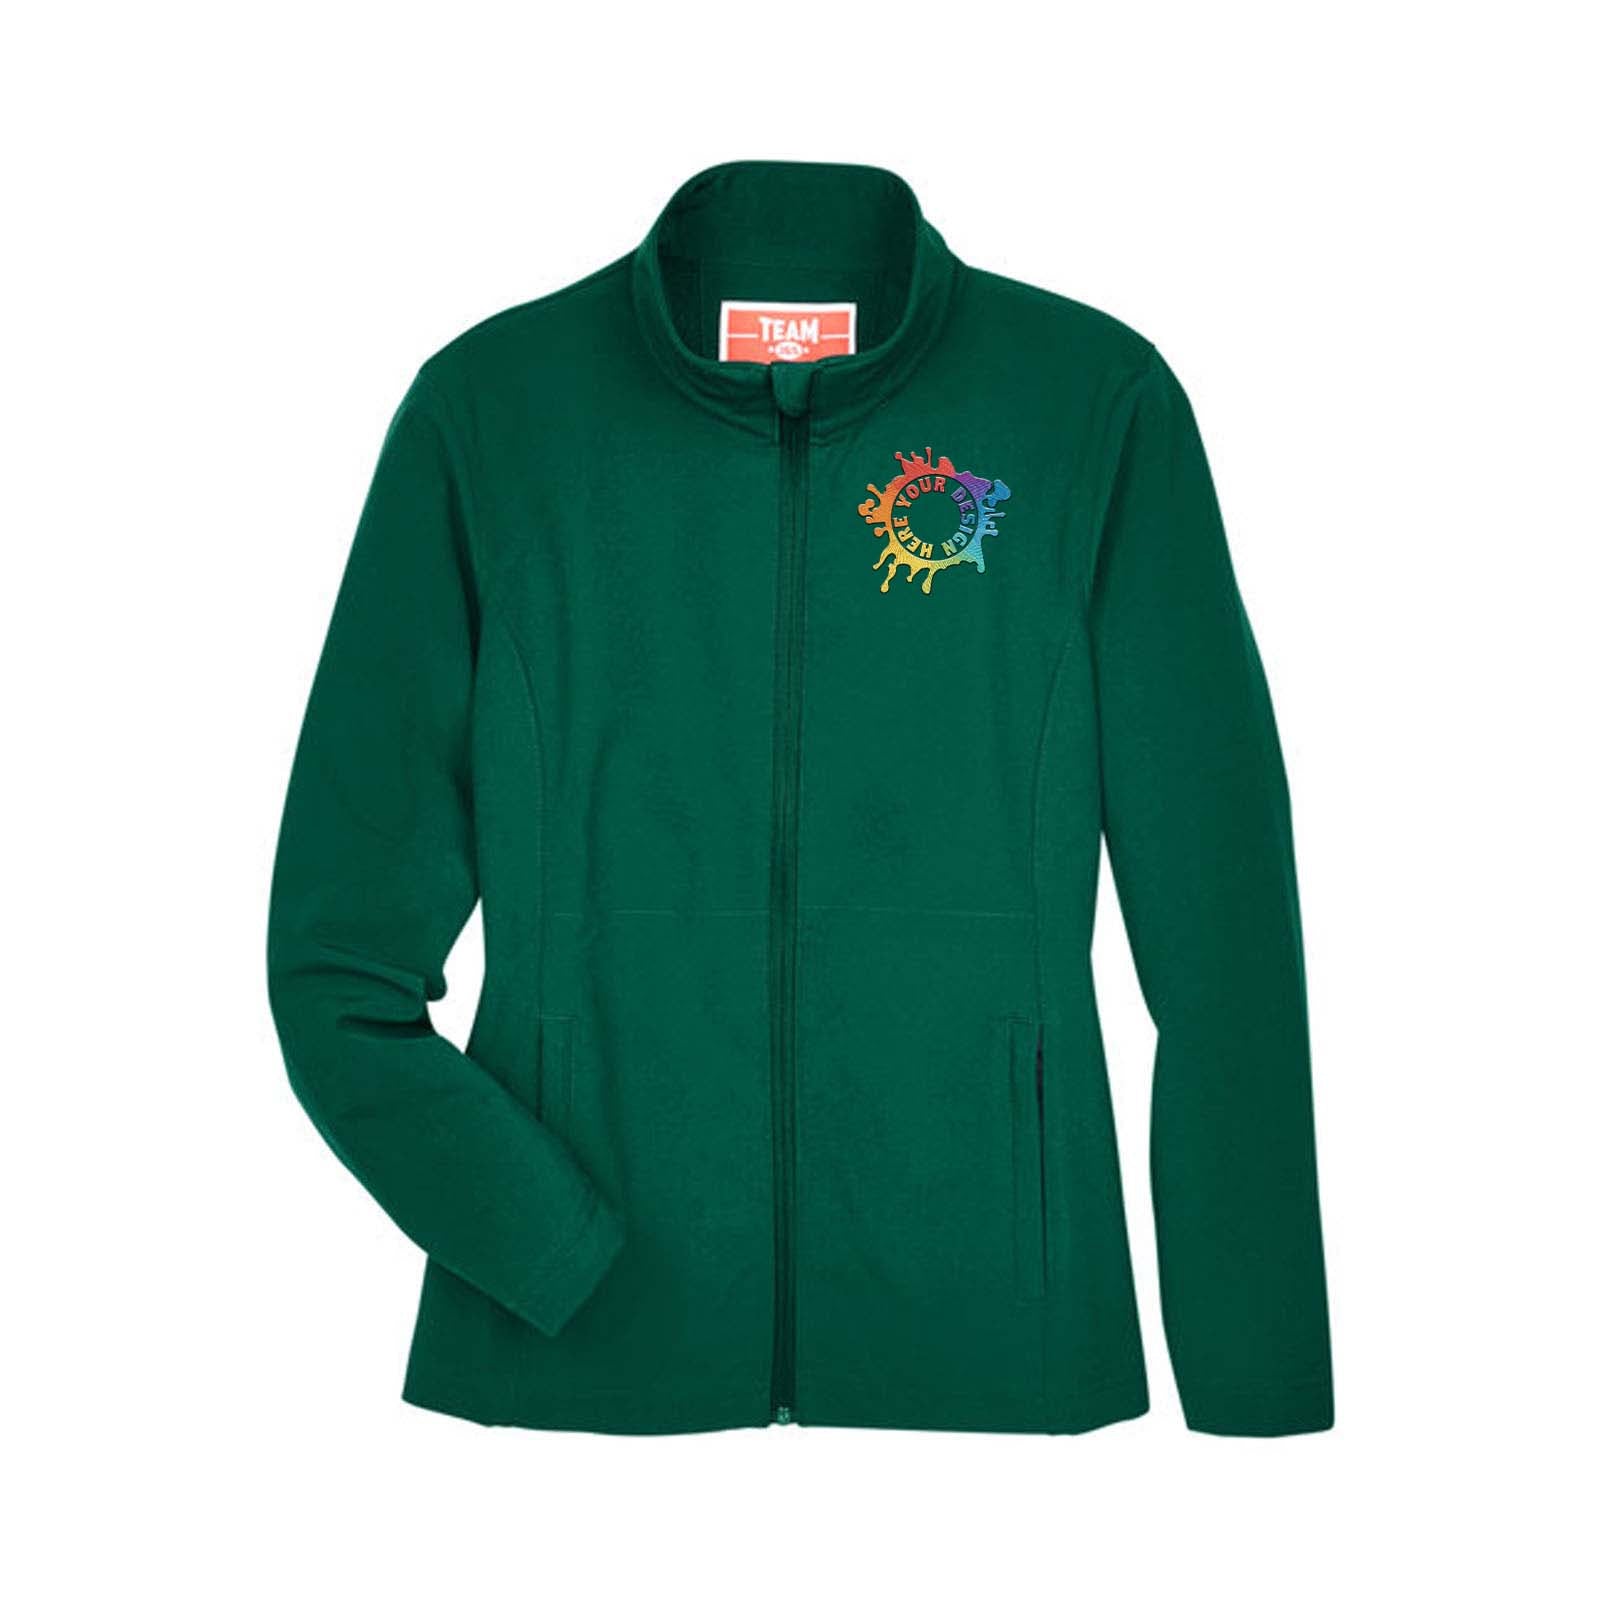 Team 365 Ladies' Leader Soft Shell Jacket Embroidery - Mato & Hash